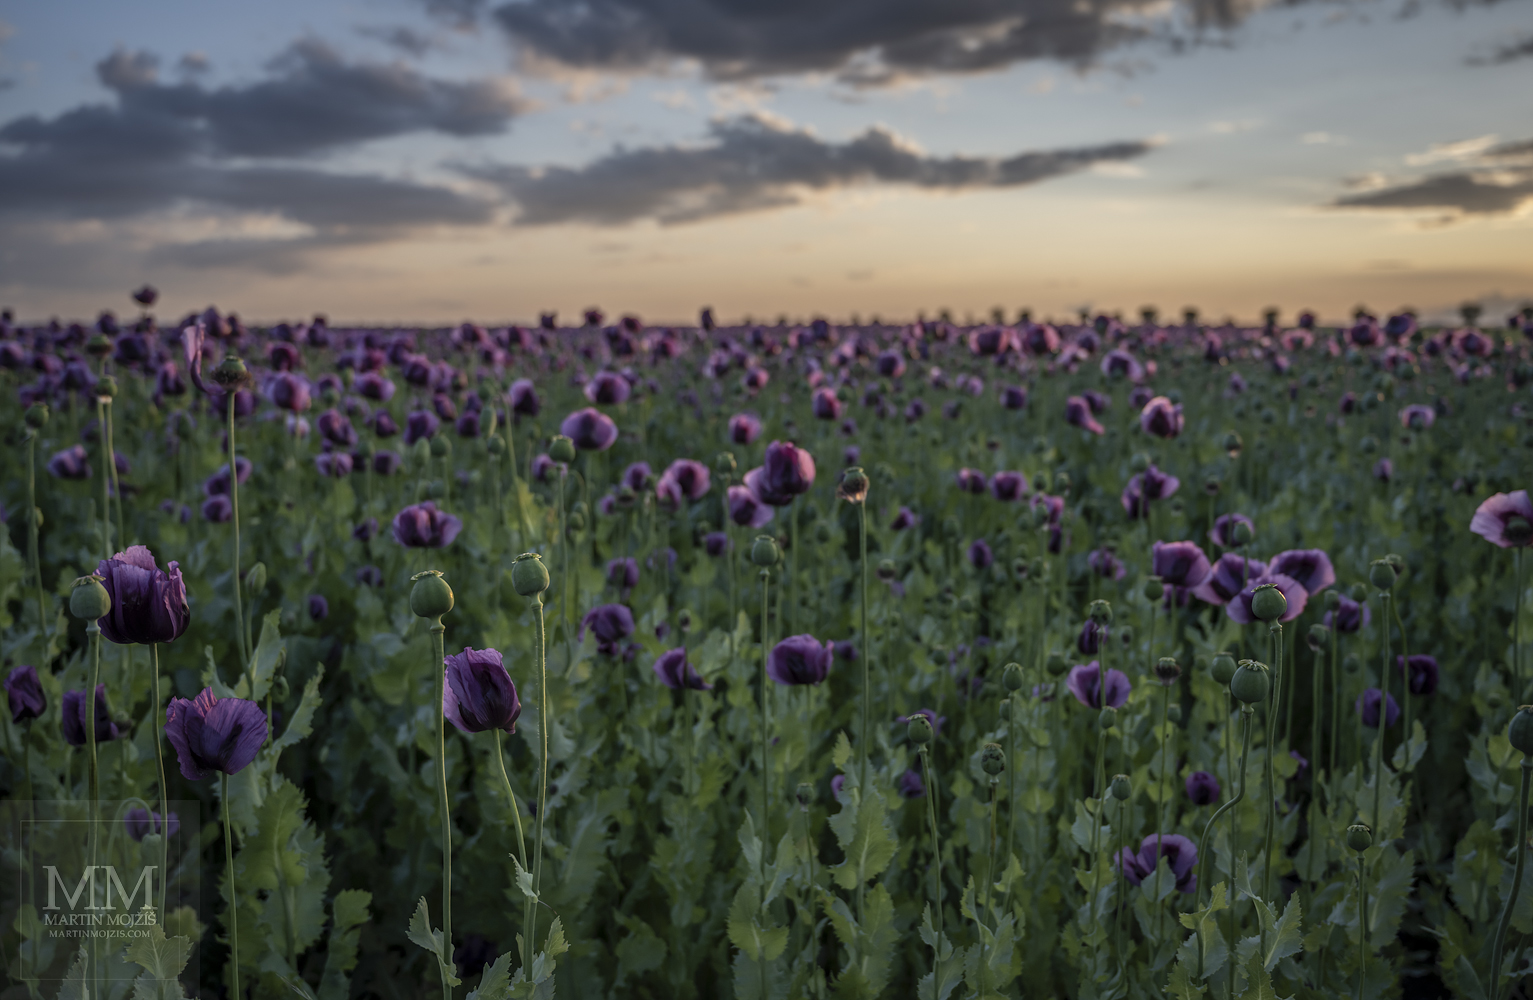 A field of blooming poppies in the early evening. Fine Art large format landscape photograph LANDSCAPE WITH THE POPPY FLOWERS I. Photographer Martin Mojzis.